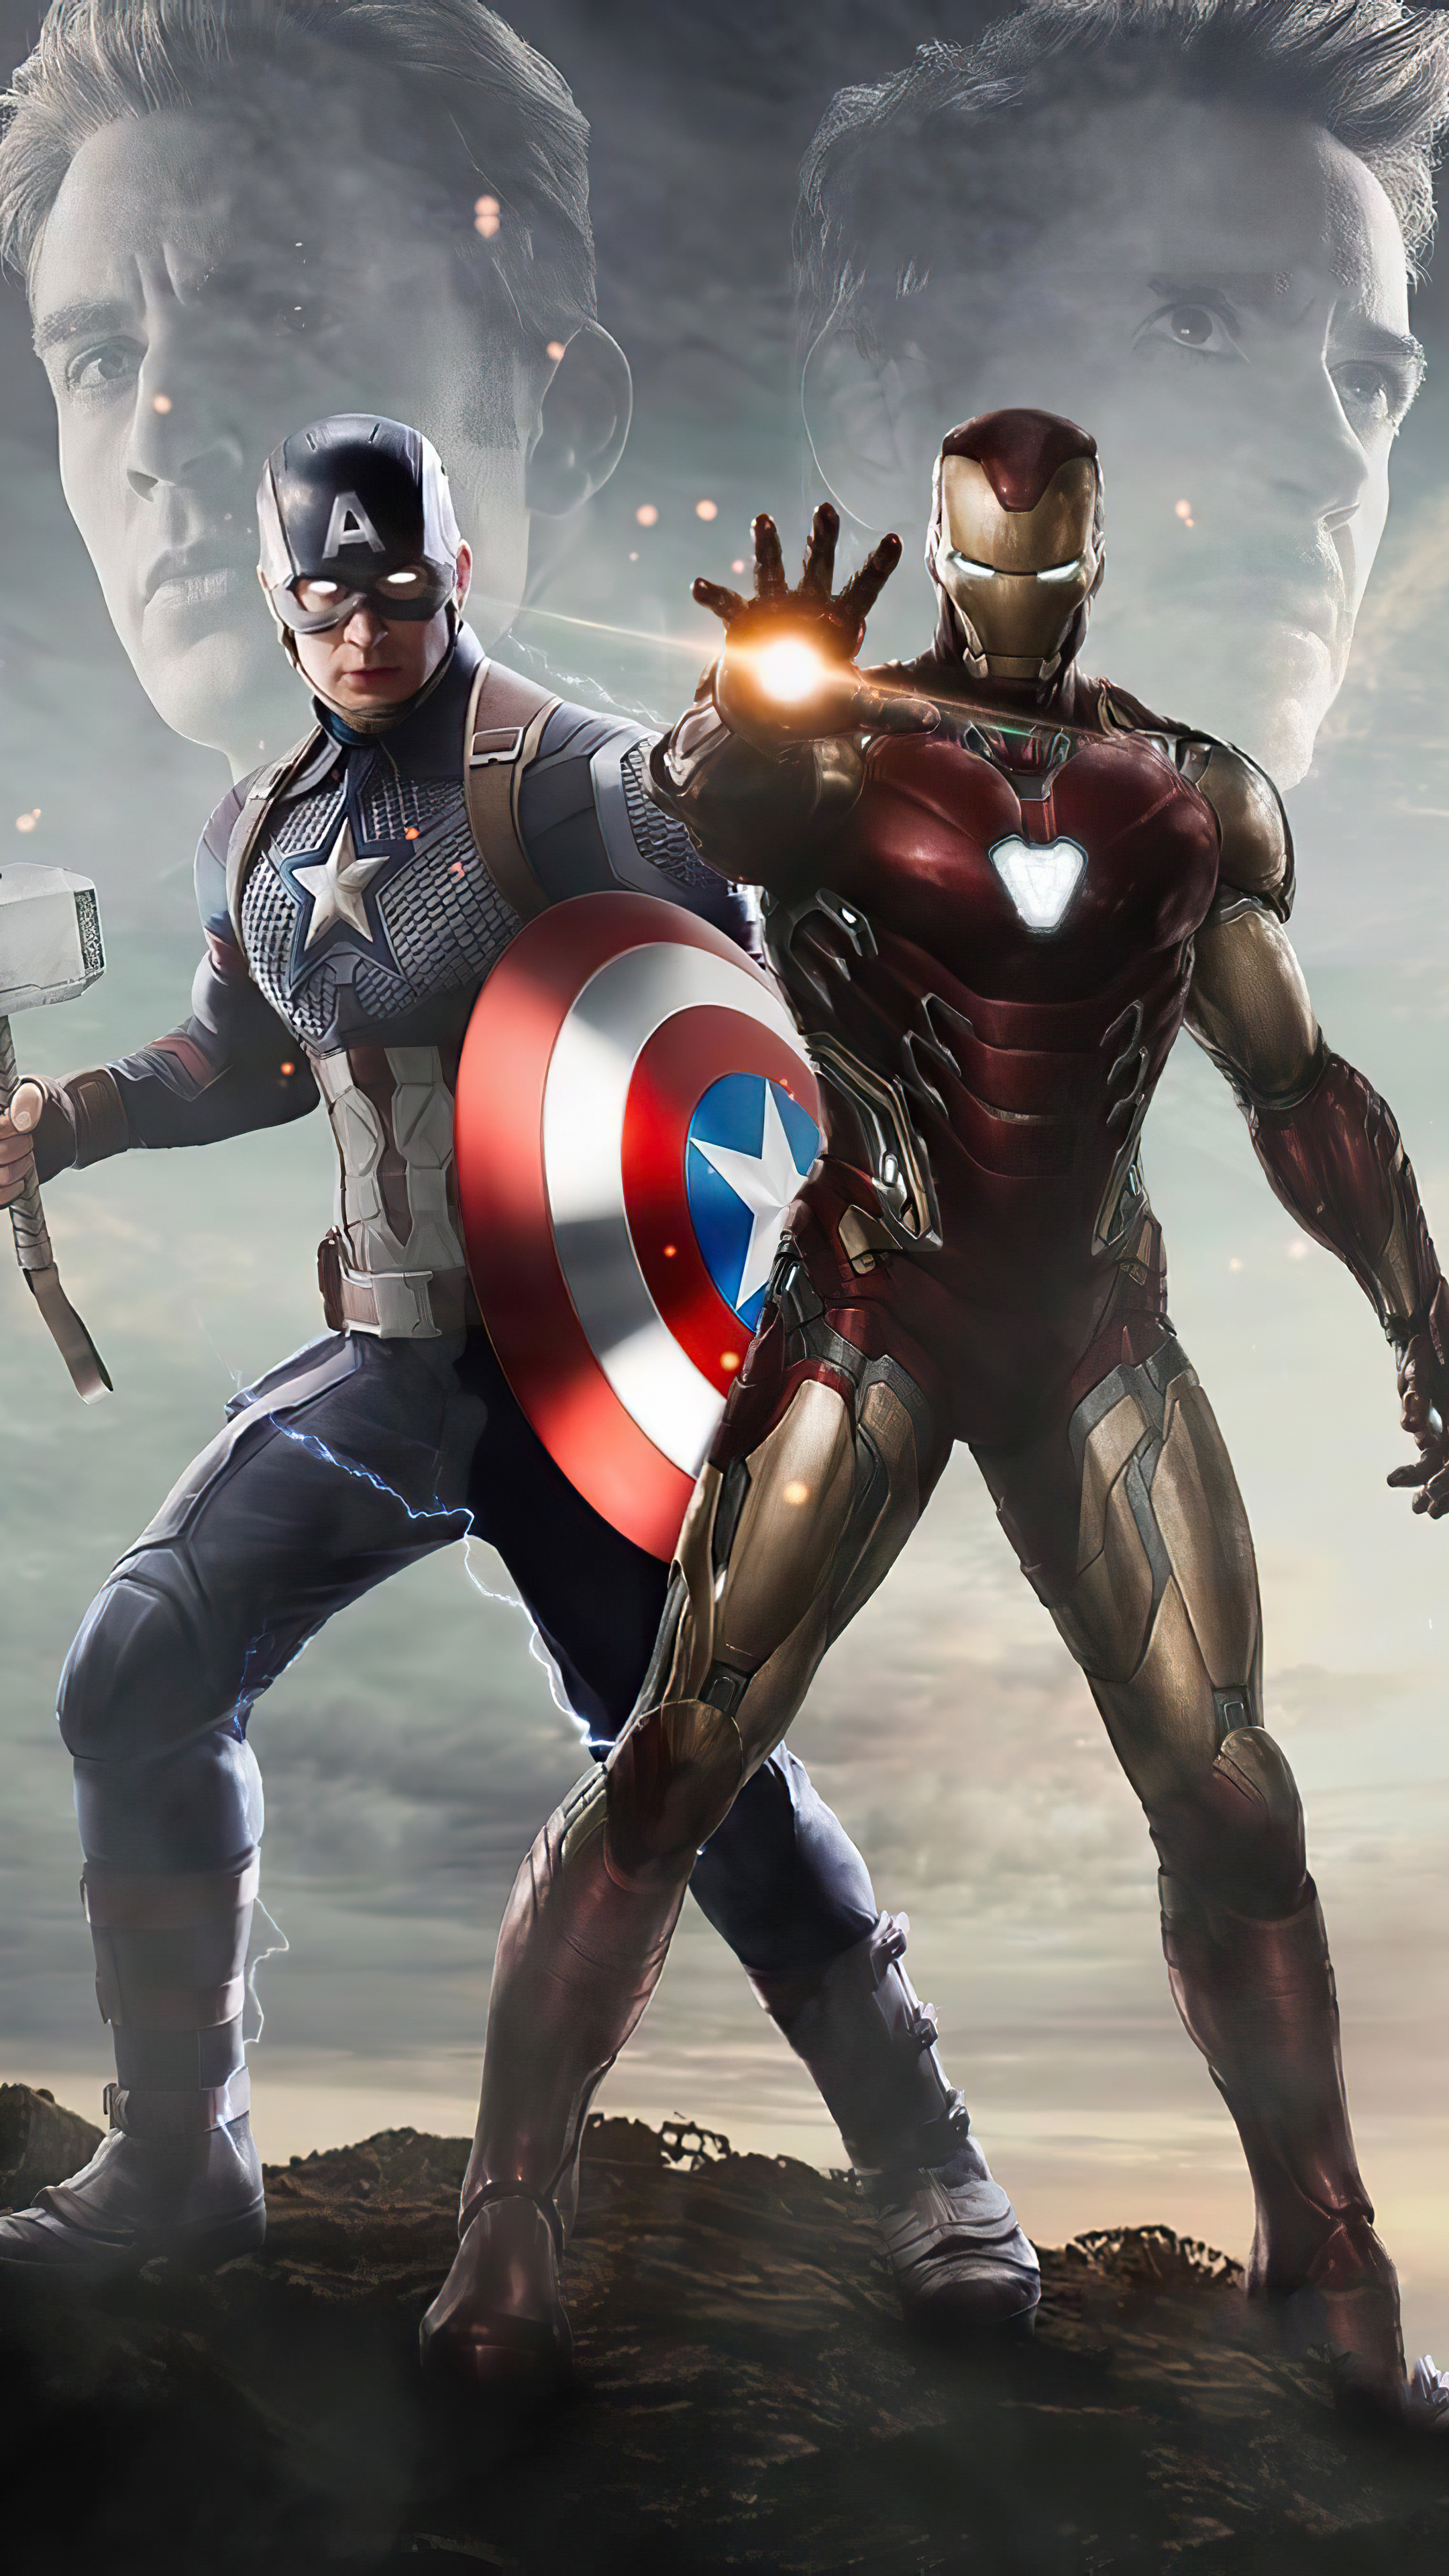 2160x3840 Captain America Vs Iron Man 4k Artwork Sony Xperia X,XZ,Z5  Premium HD 4k Wallpapers, Images, Backgrounds, Photos and Pictures